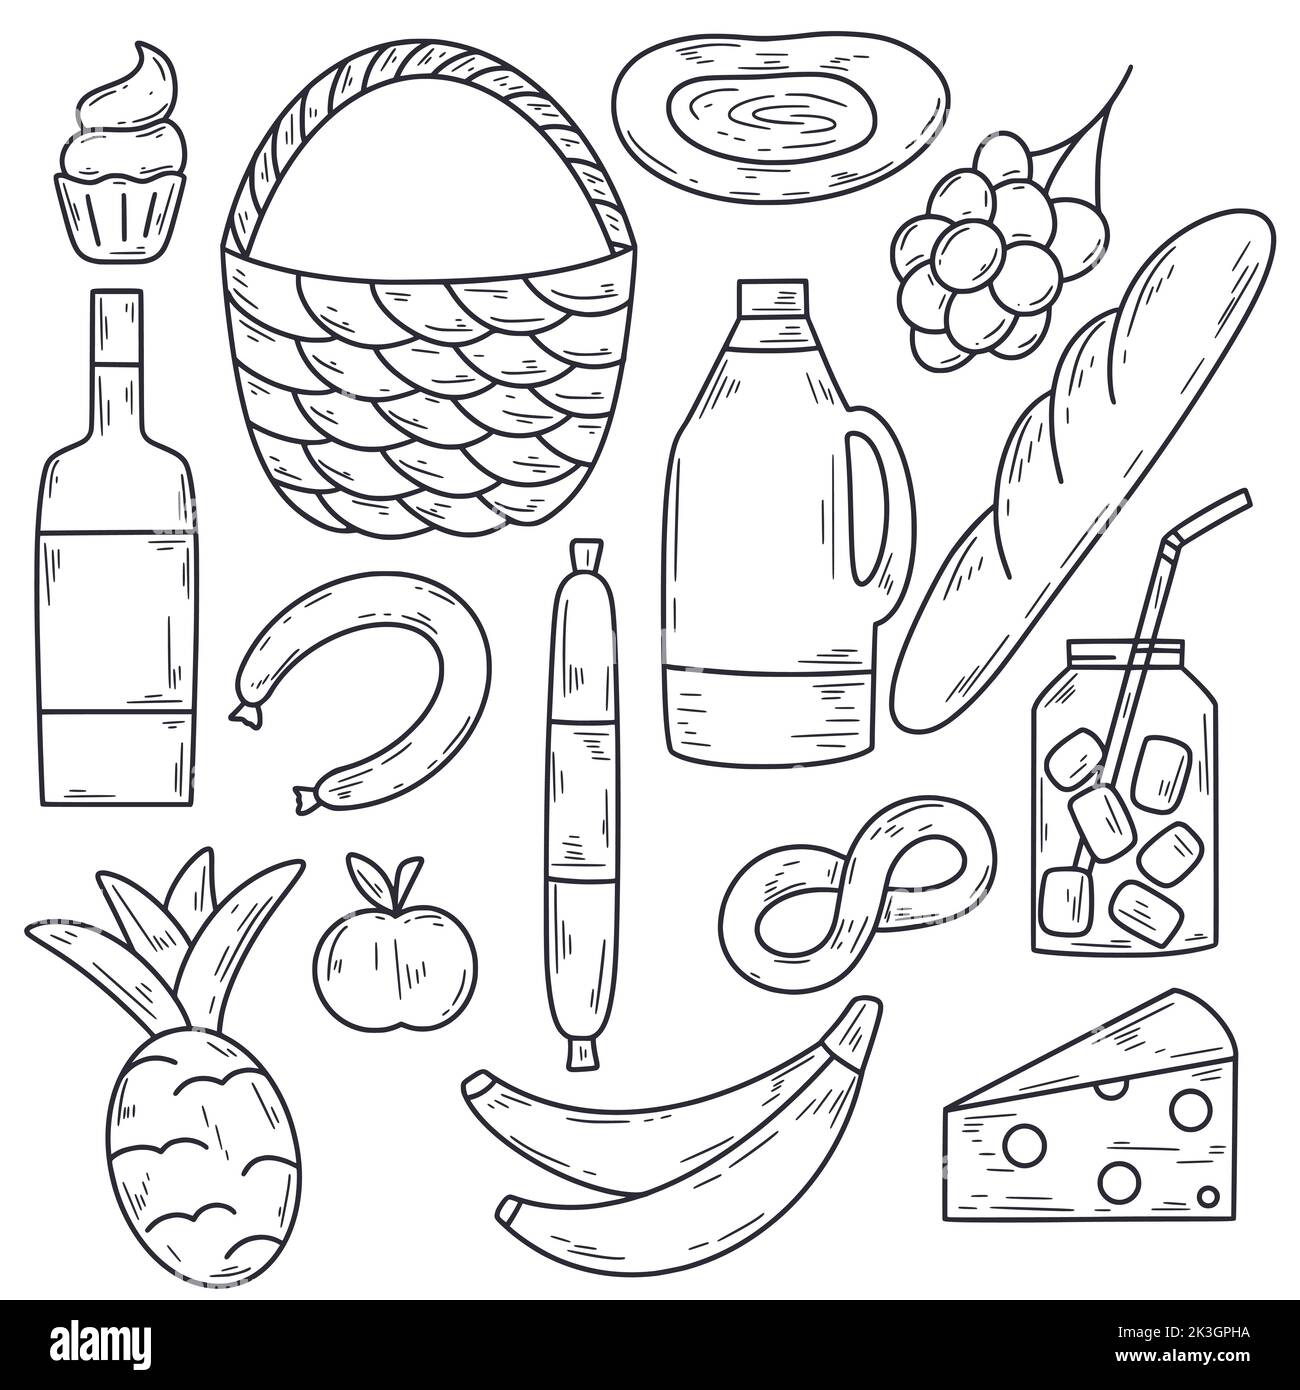 Picnic food doodle set. Sketch items for street nature party isolated doodle illustration. Collection of fruits, sausage, cheese and drinks hand drawn Stock Vector